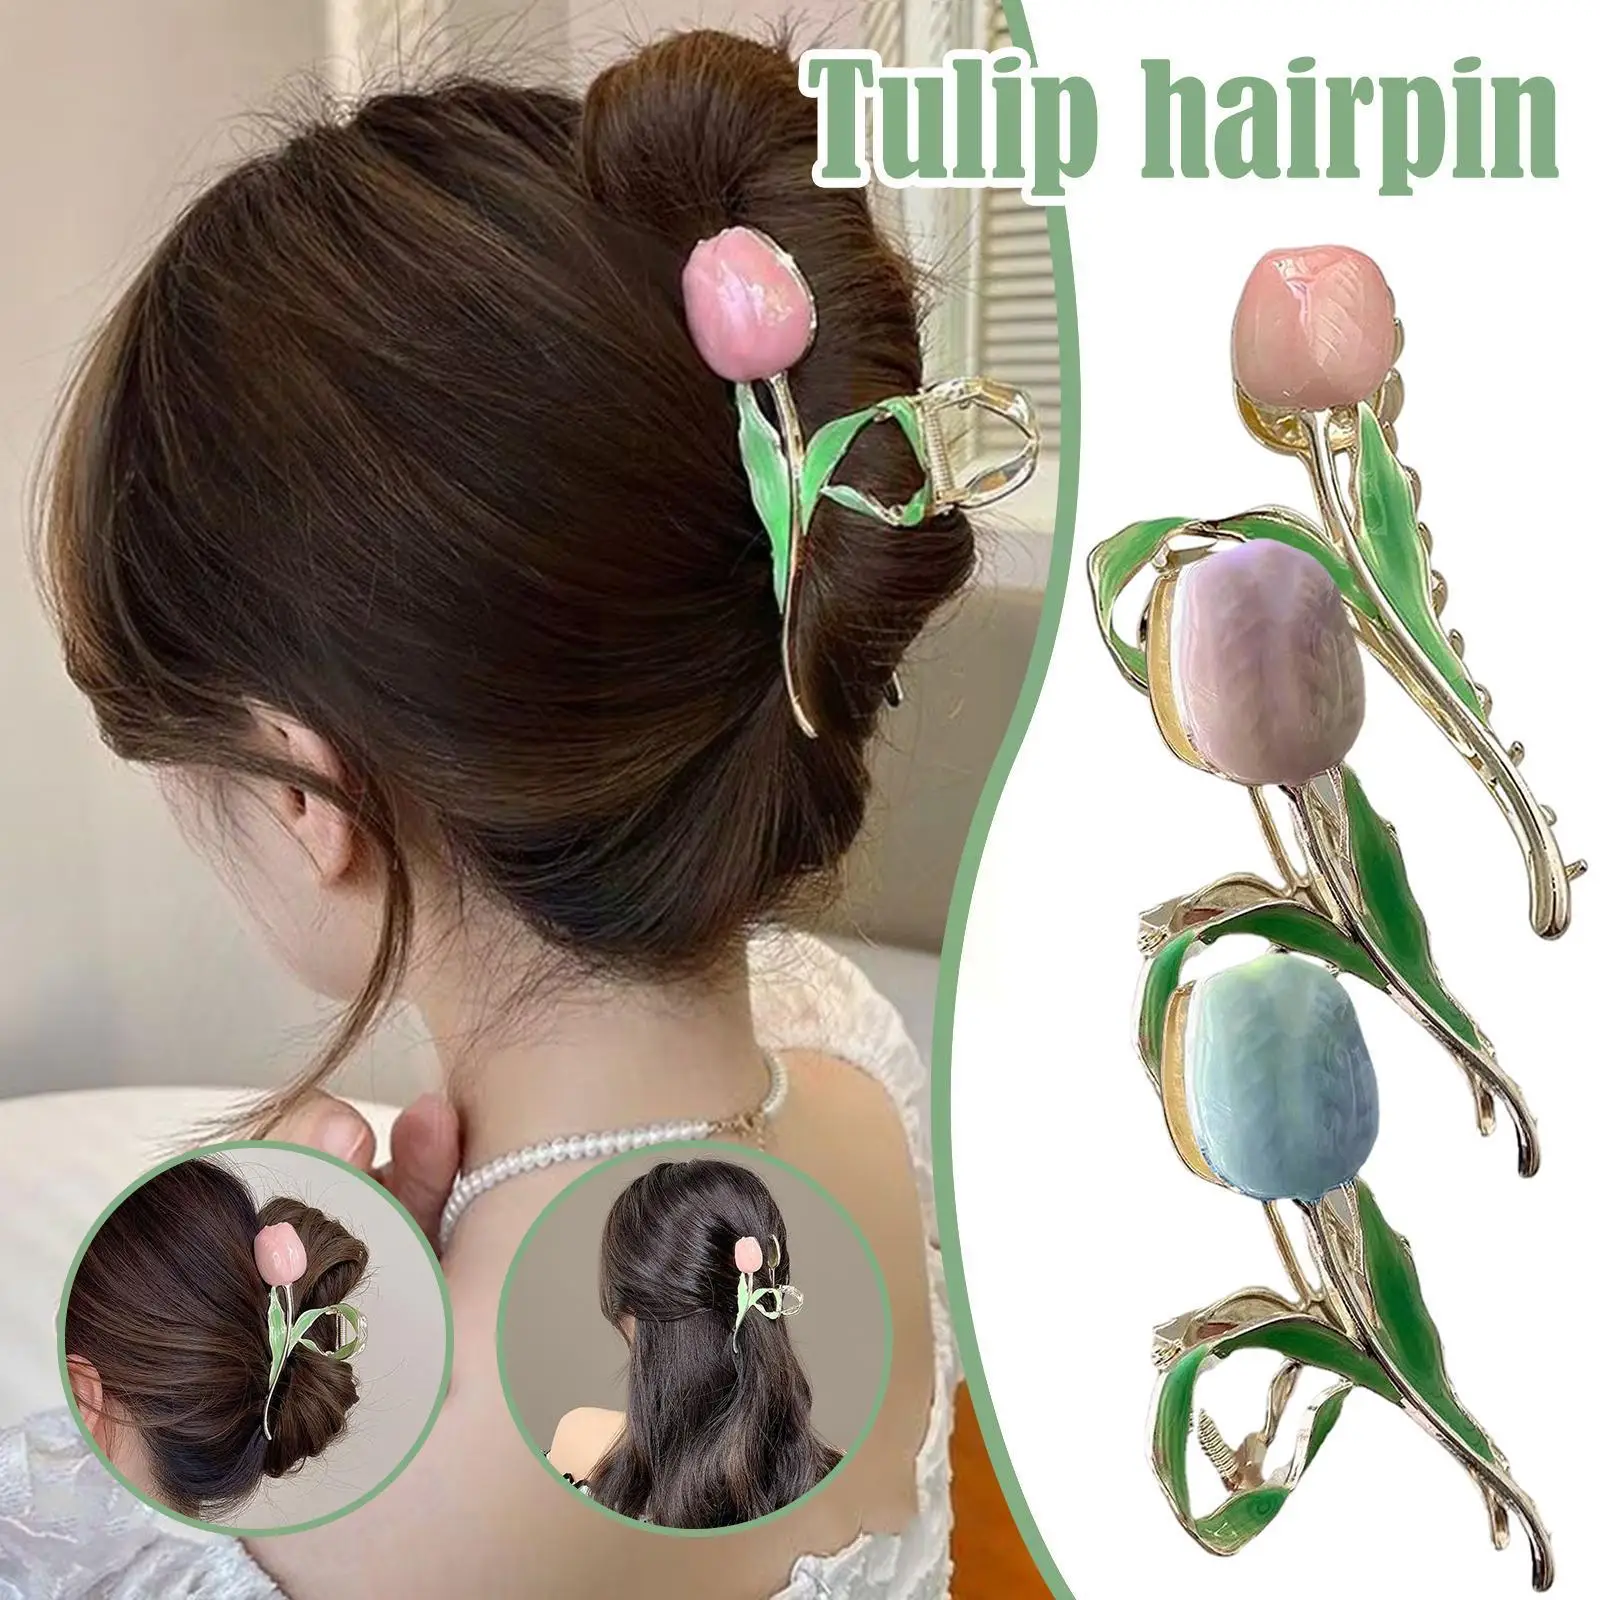 

2022 New Design Colorful Acetic Tulip Daisy Hair Clip Claws Flower Hairpin For Women Makeup Bath Hair Accessories Q0w0